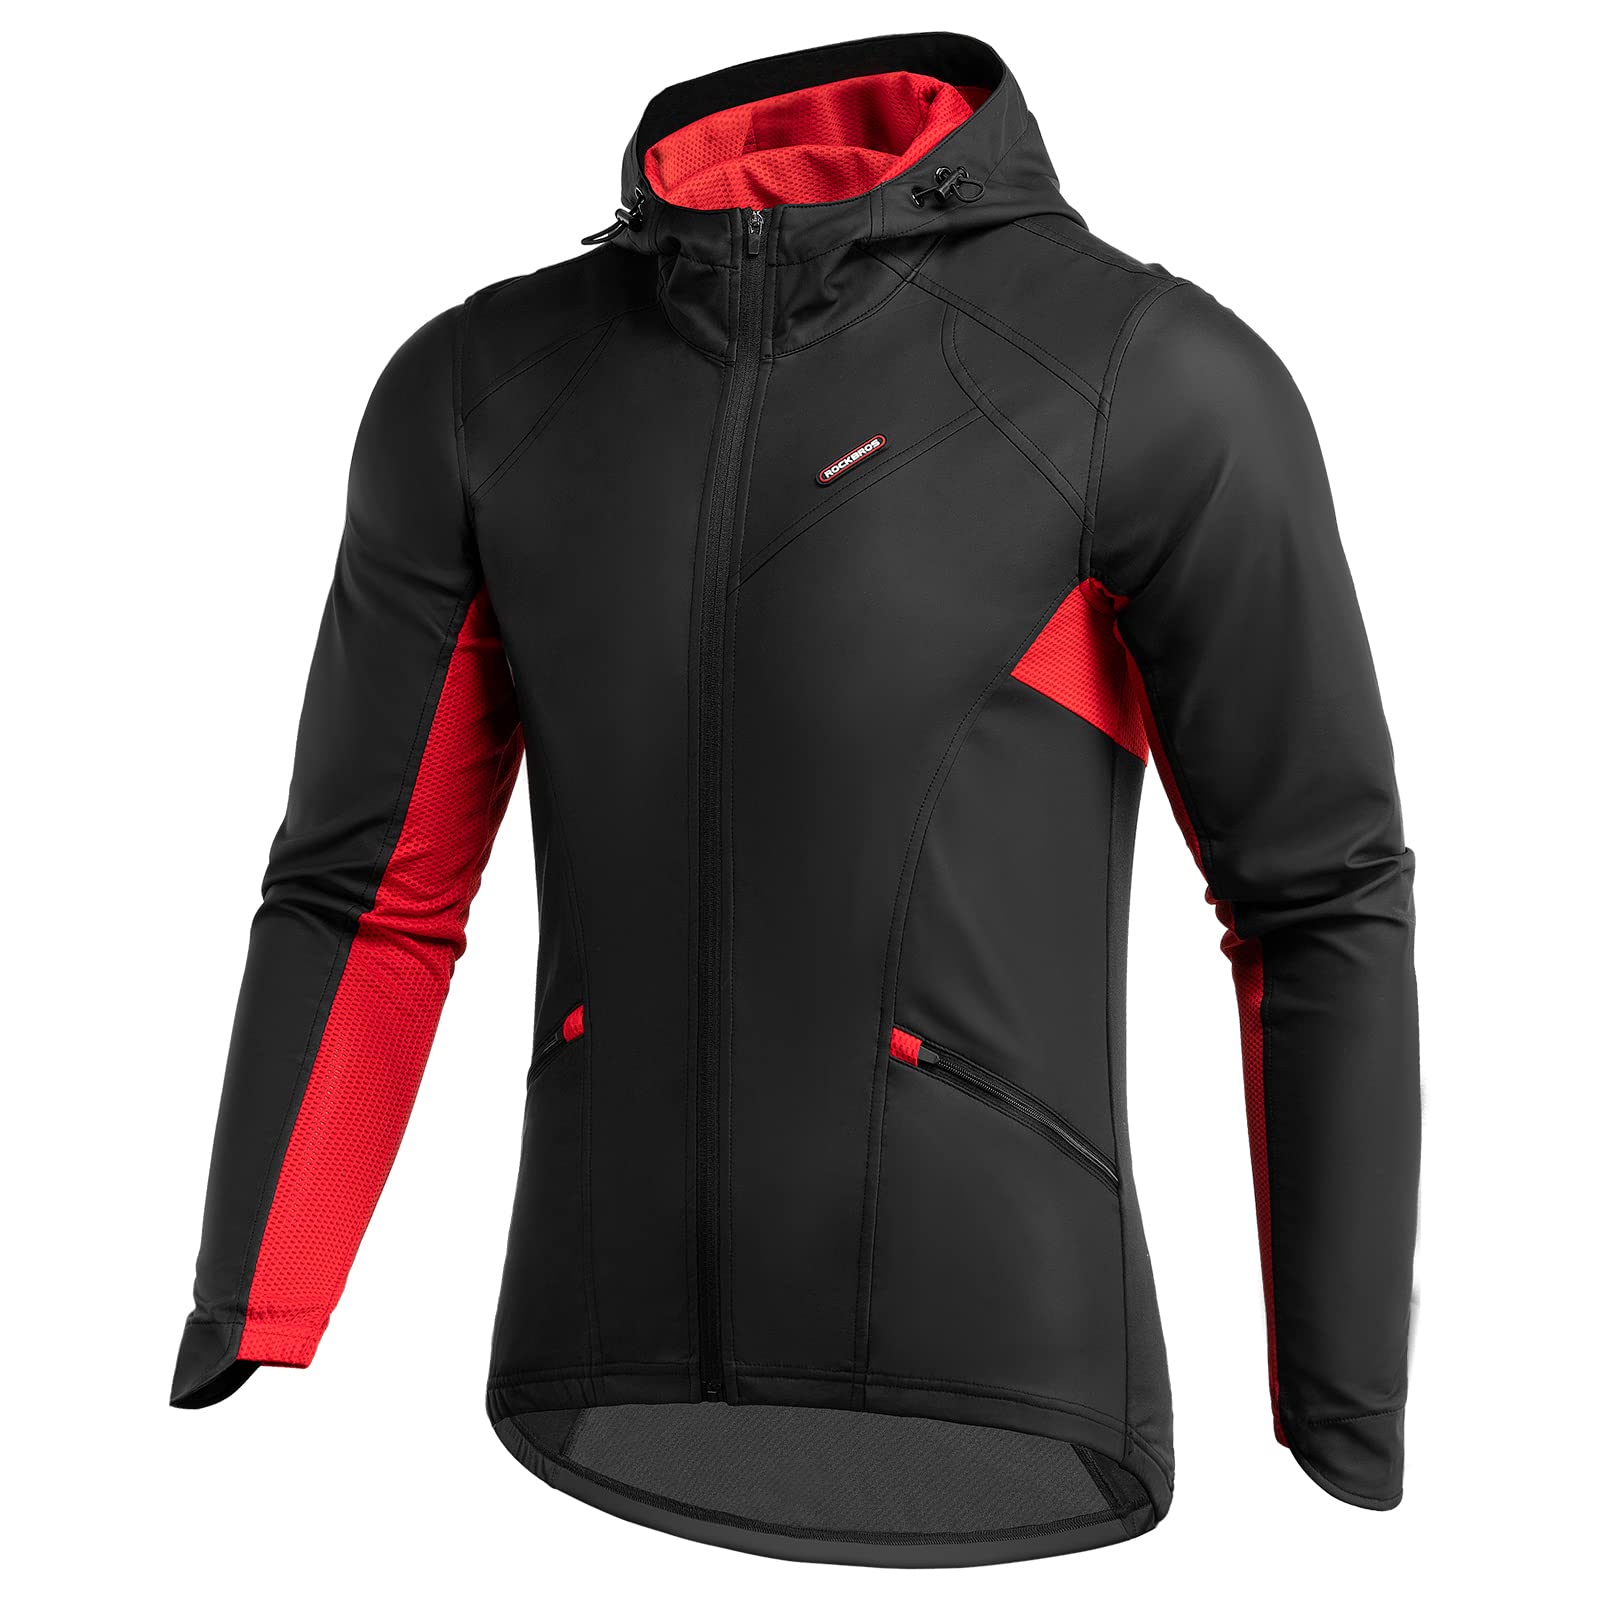 ROCKBROS Winter Cycling Jacket for Men Outdoor Sports Soft Shell Jacket